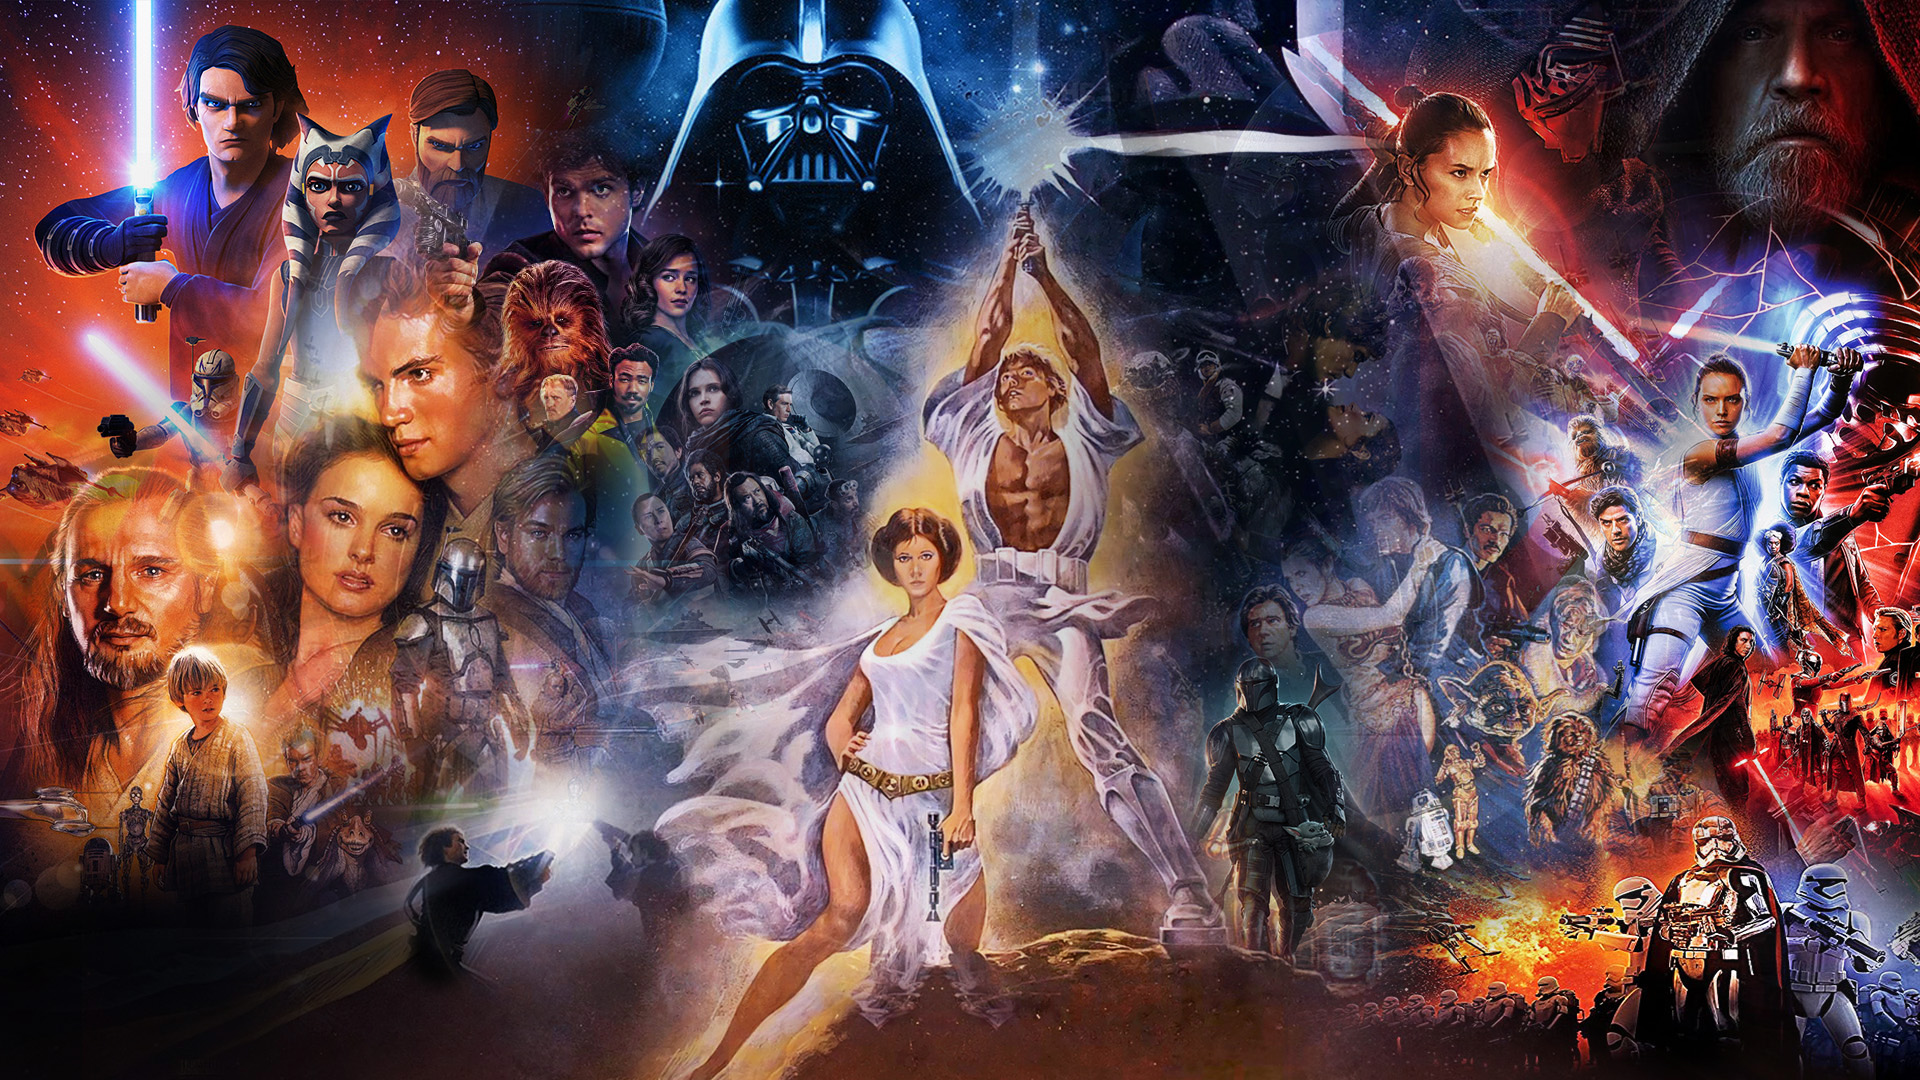 May The 4th Be With You 22 Star Wars Wallpaper By Thekingblader995 On Deviantart